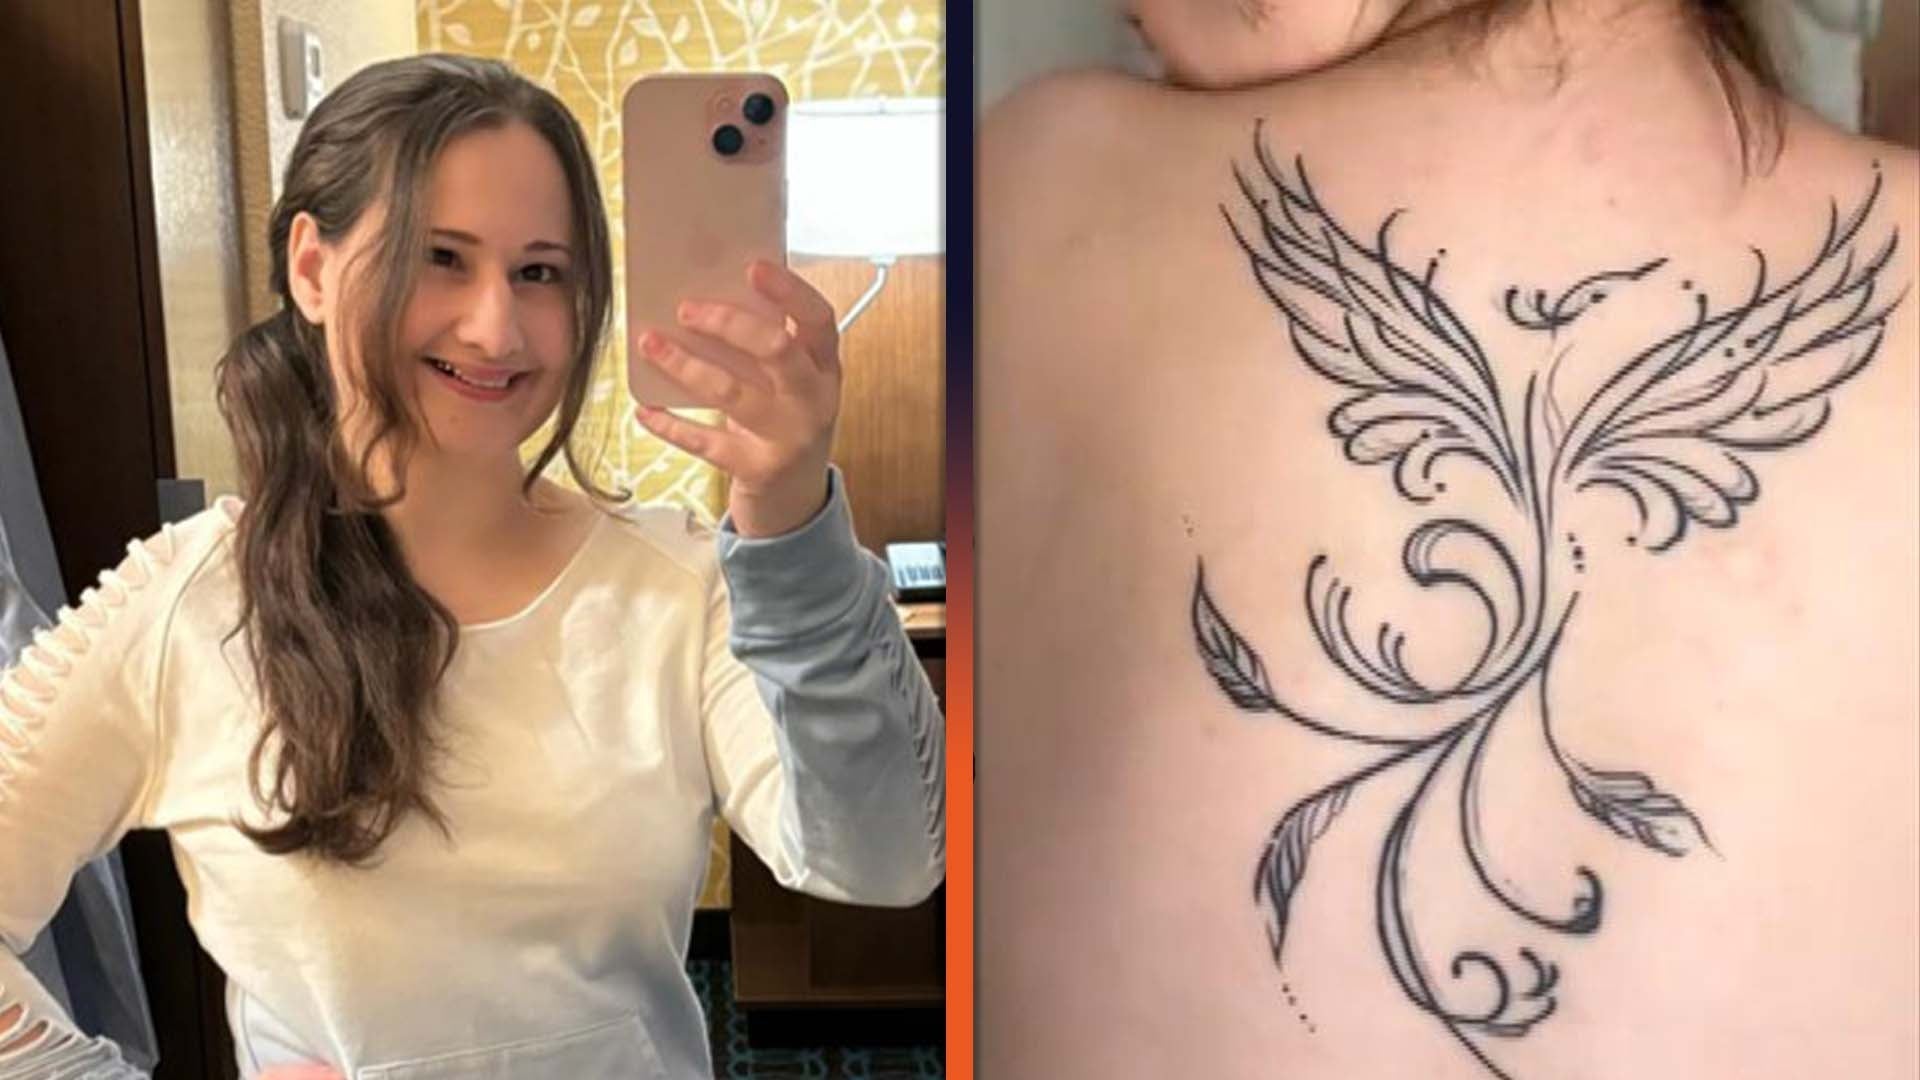 Pregnant Gypsy Rose Blanchard Shows Off Large Back Tattoo